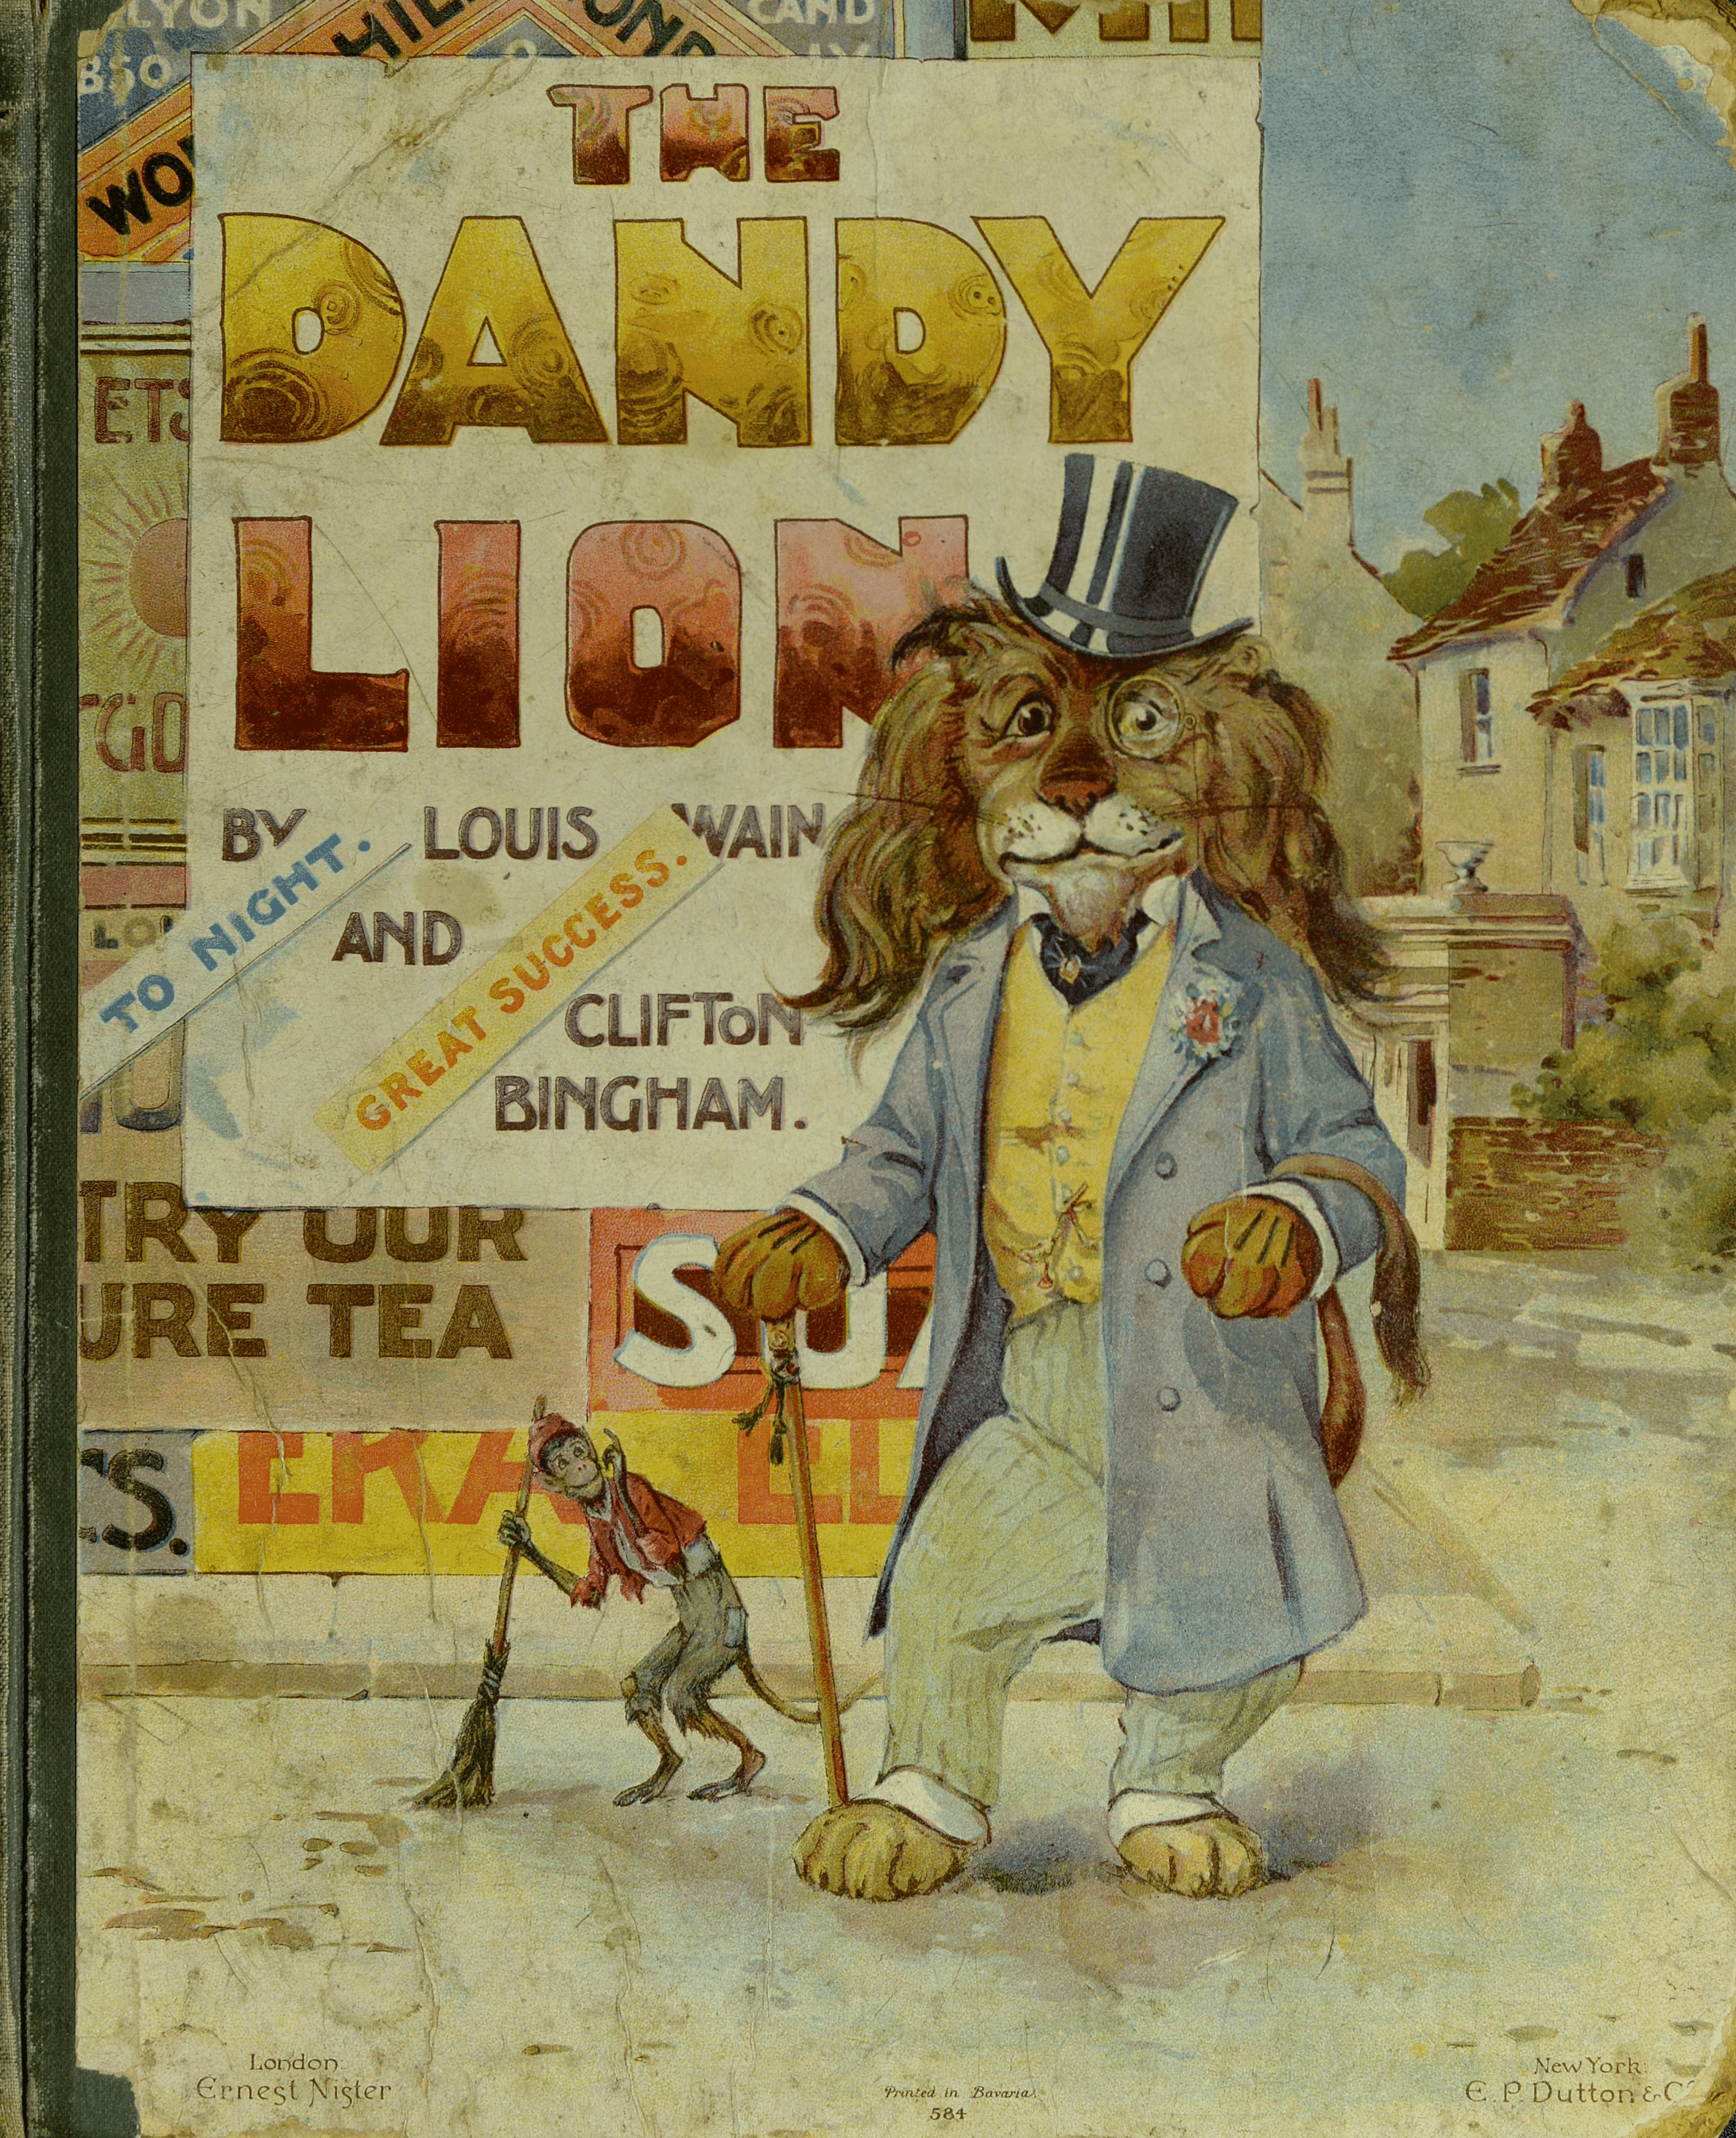 Louis Wain illustration with: 1901, 2subjects, black_and_white, book, book:the_dandy_lion, book_cover, cane, clothes, clothes:hat, clothes:monocle, color:brown, color:yellow, house, humanised, lion, monkey, outdoors, sign, smiling